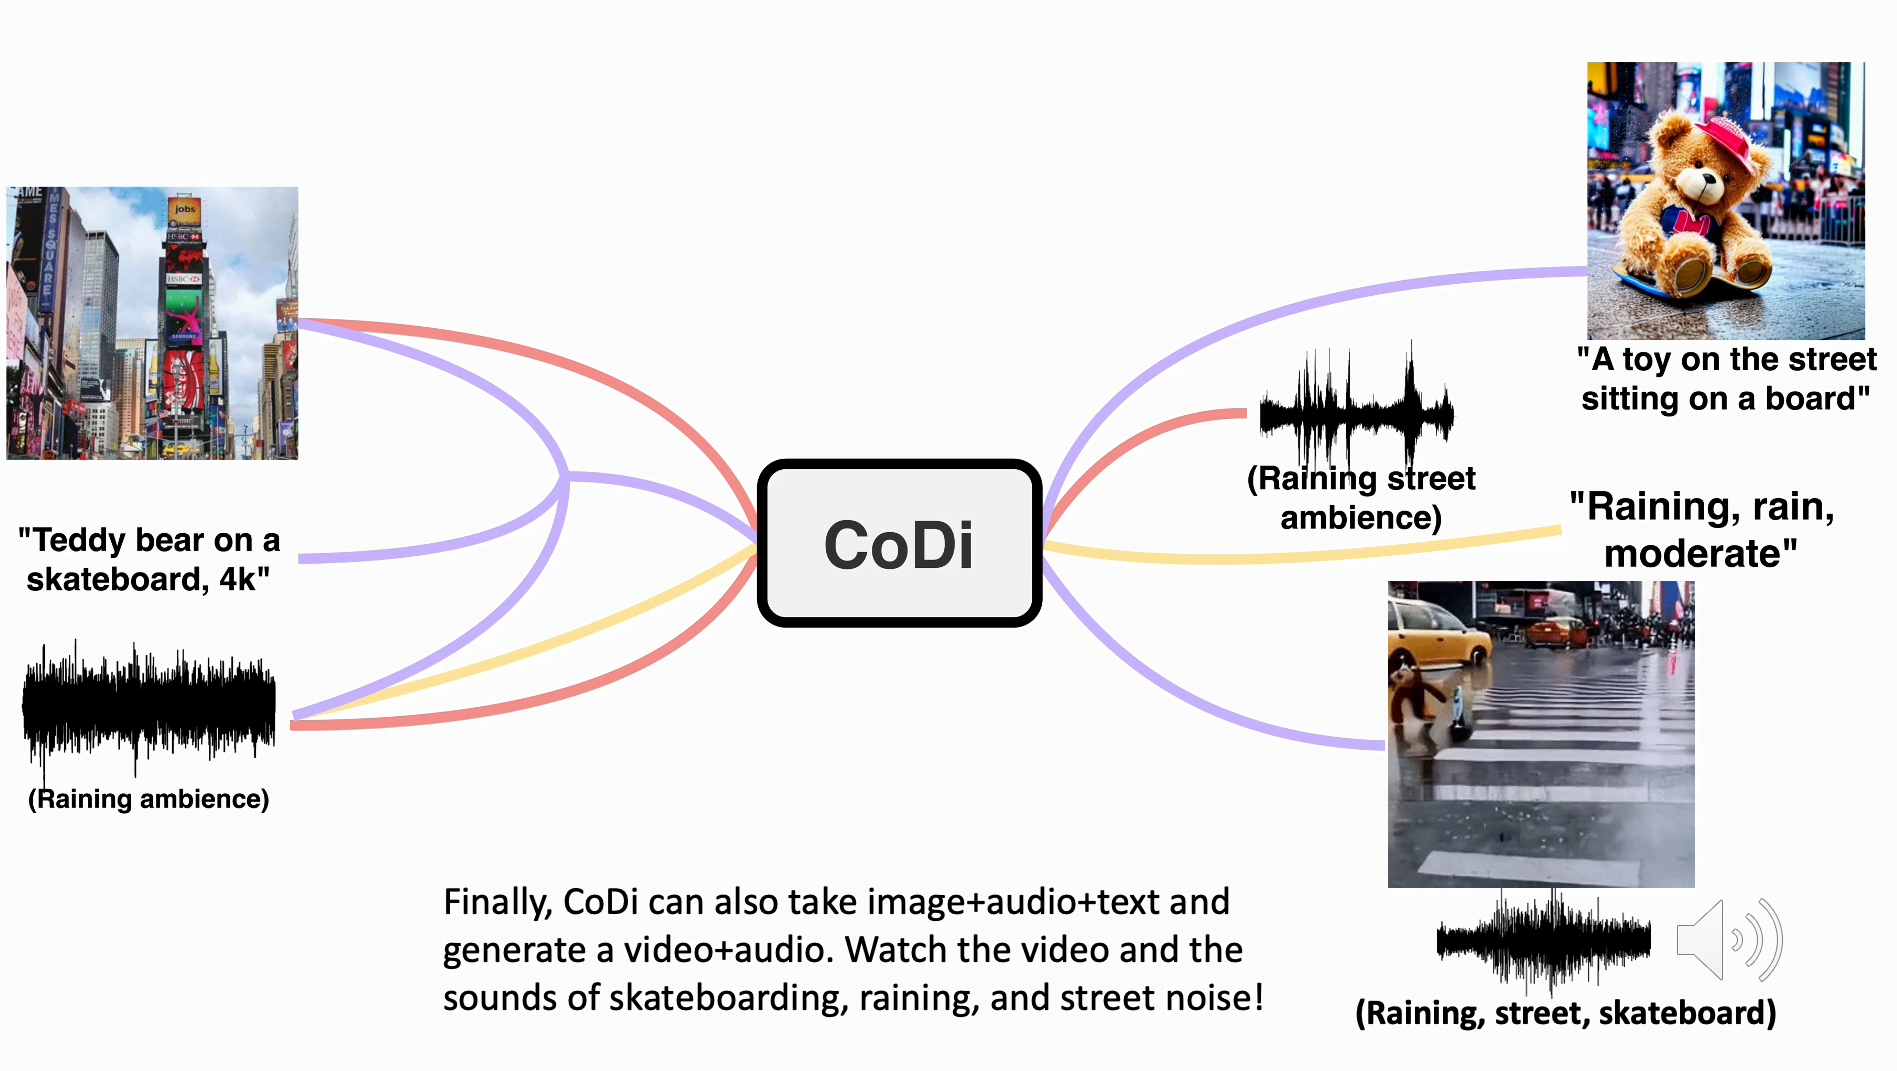 Microsoft's multimodal CoDi processes and generates text, images, video, and audio